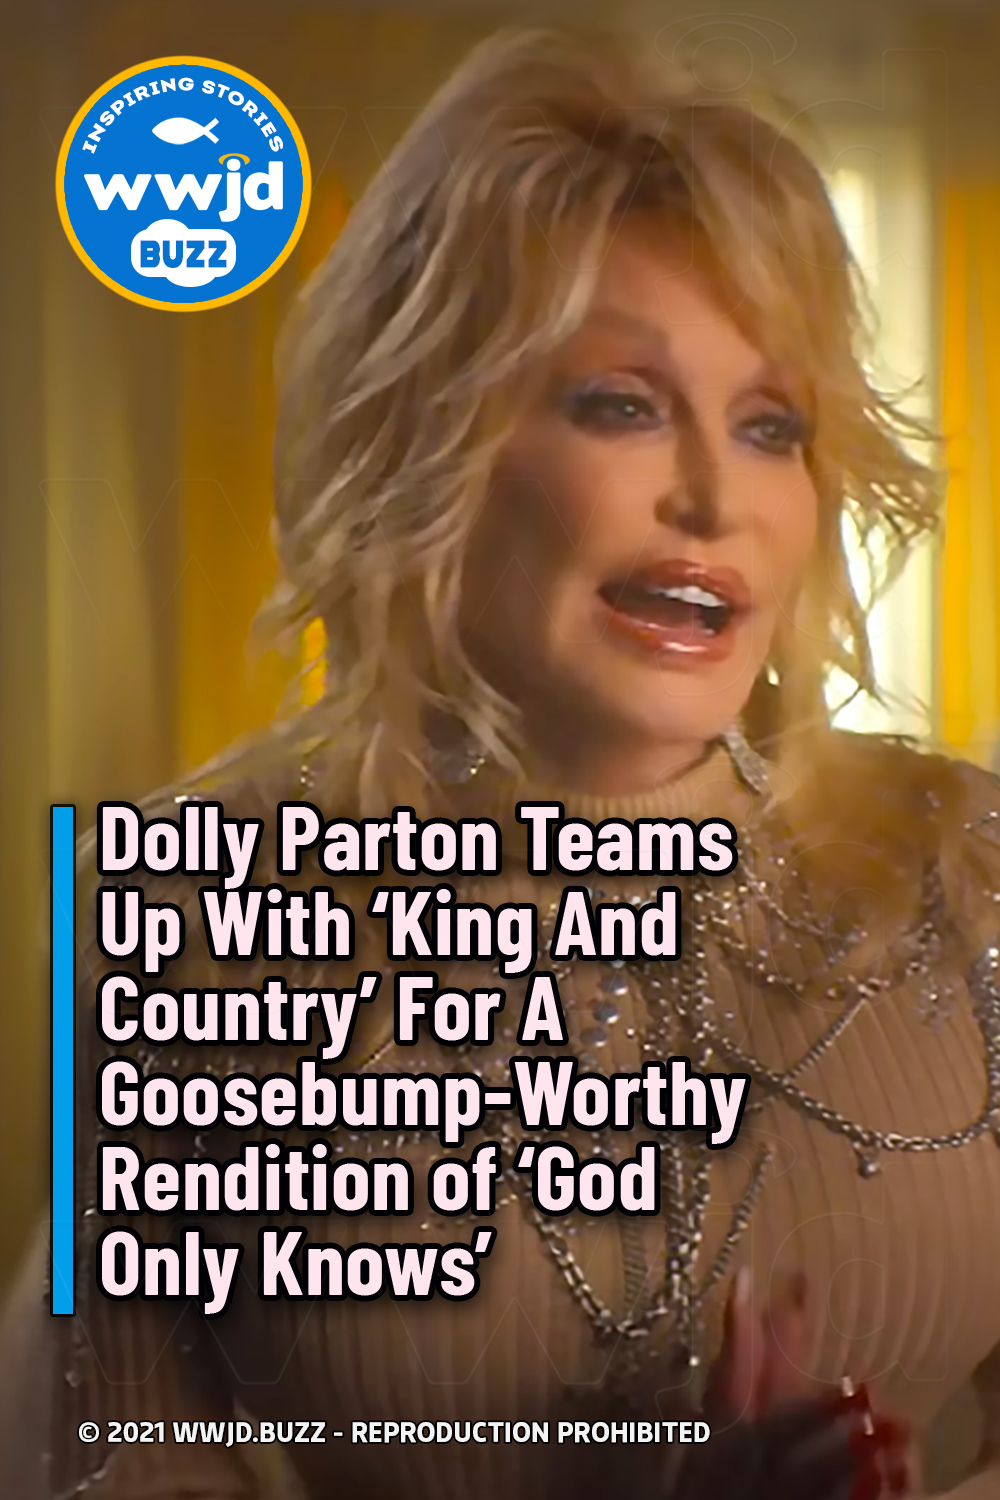 Dolly Parton Teams Up With \'King And Country\' For A Goosebump-Worthy Rendition of \'God Only Knows\'